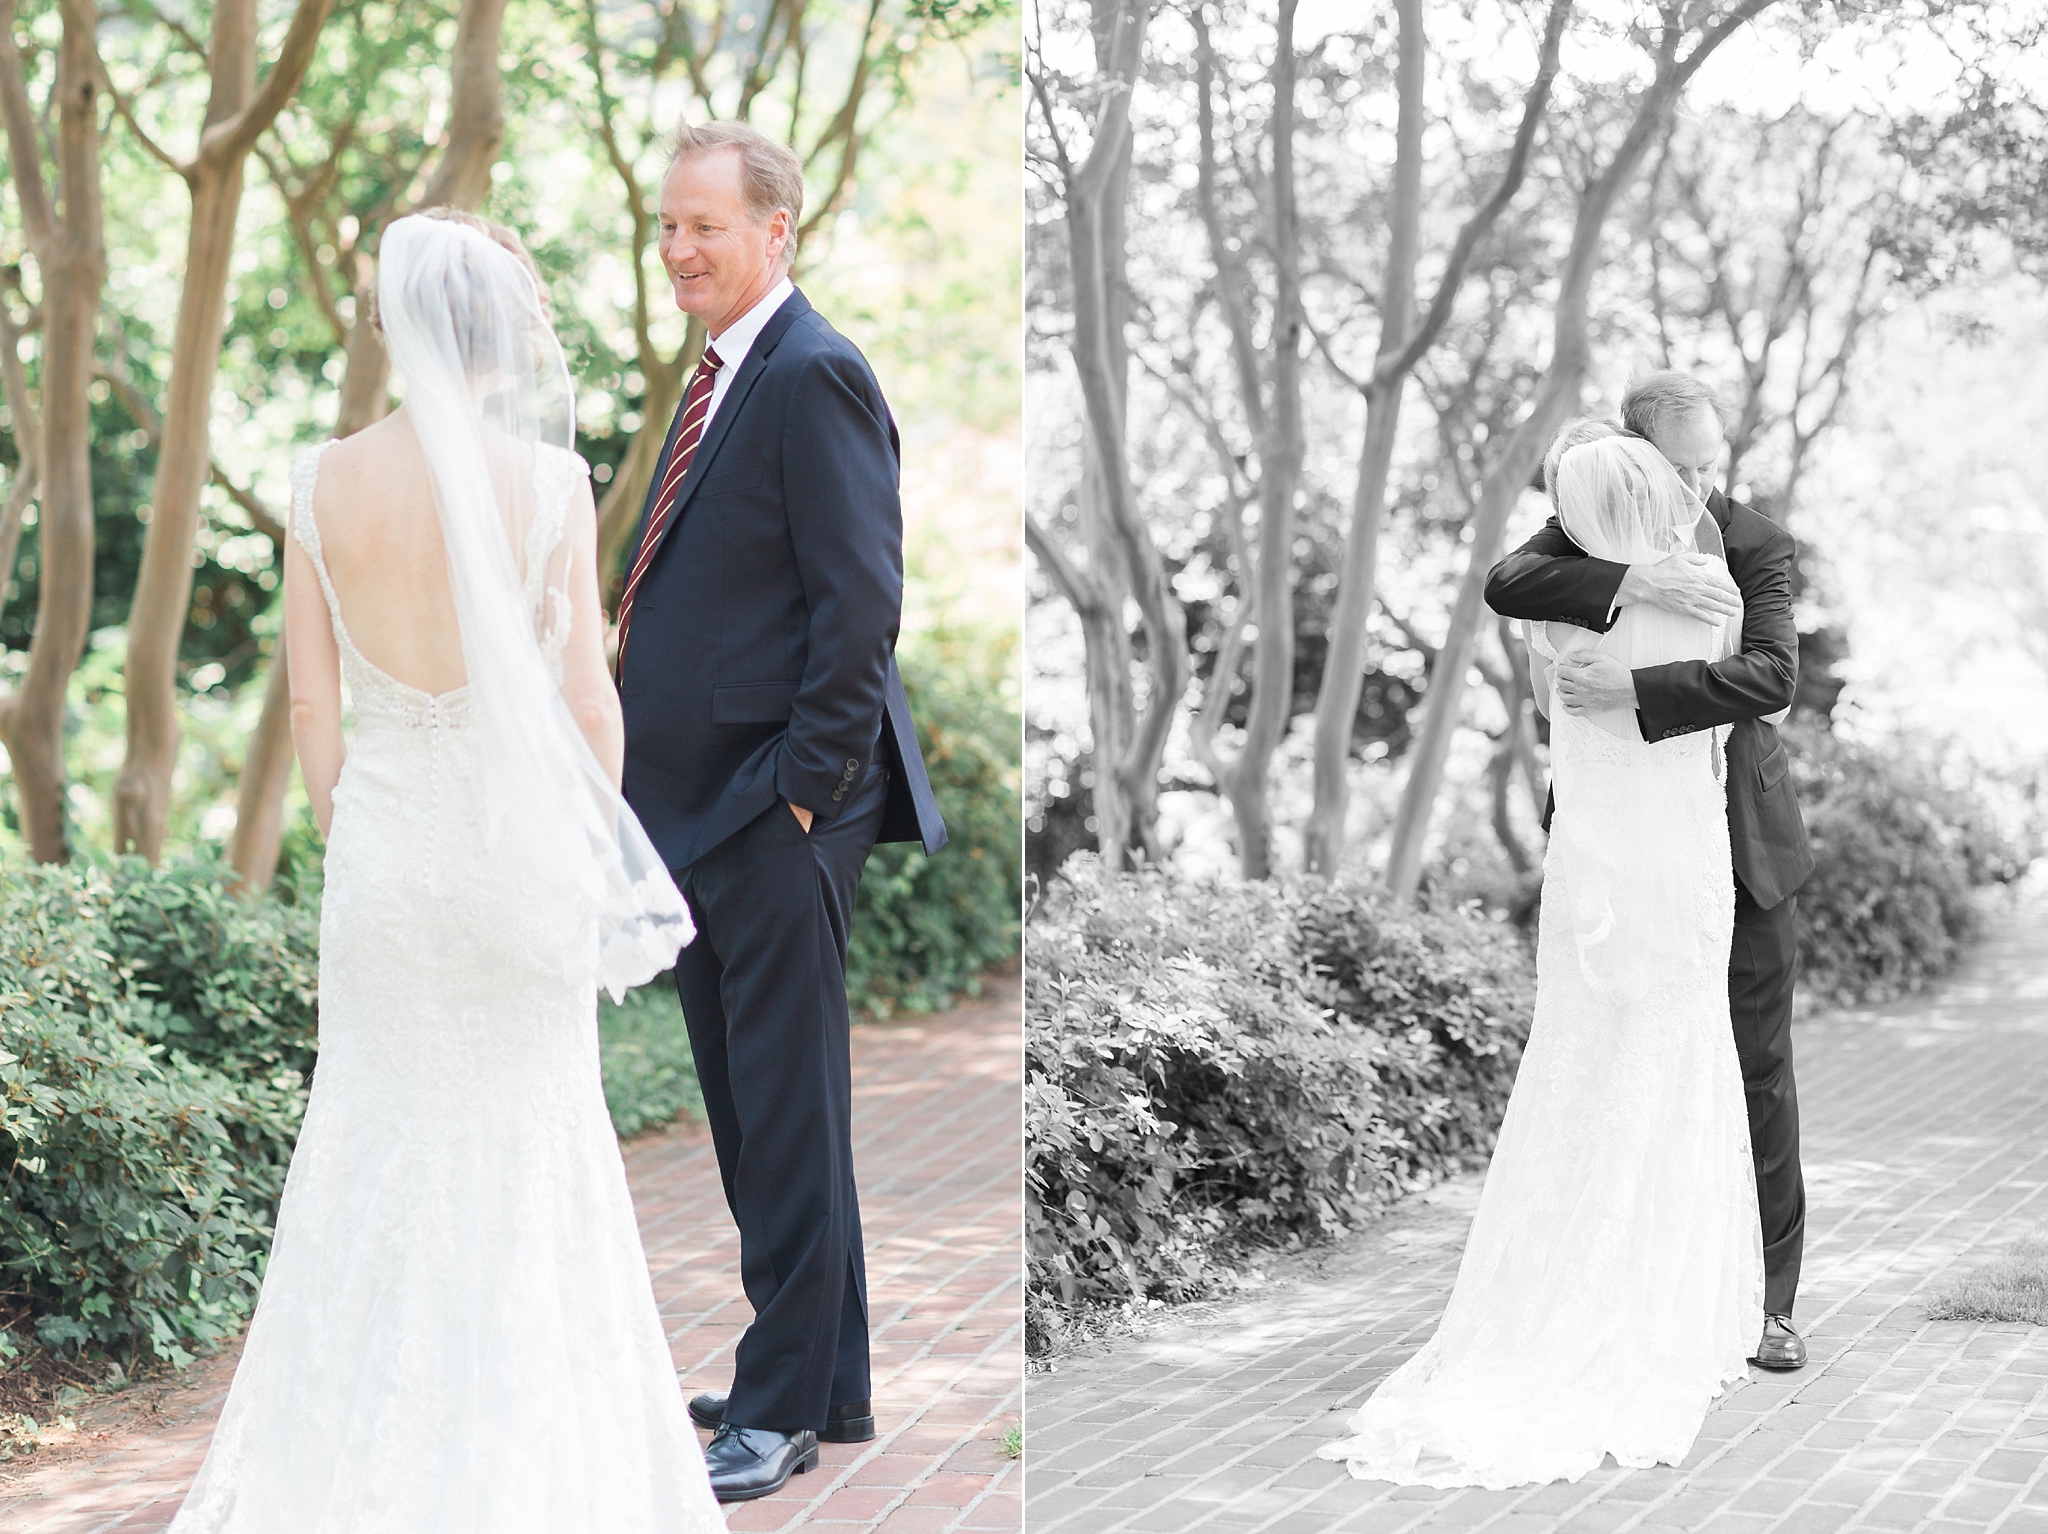 Most brides are familiar with the idea of a "First Look", but this Washington, DC wedding photographer shares information about the other kind of first look.